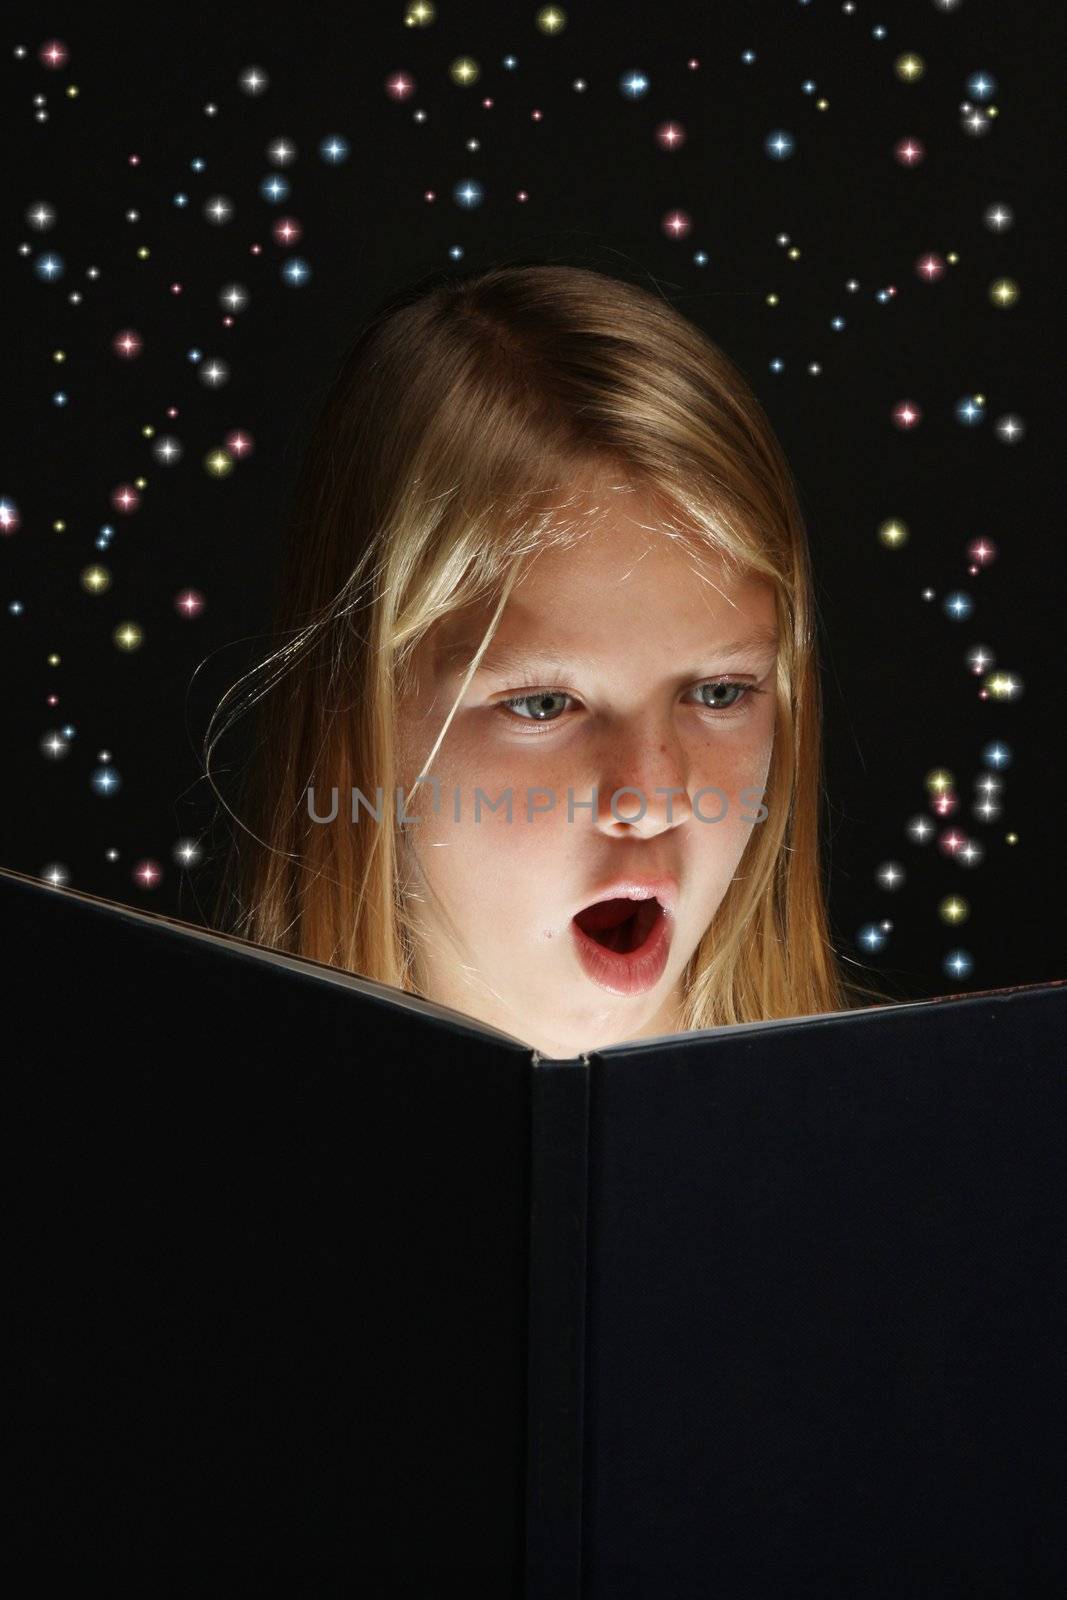 Pretty young school girl engrossed in reading a book with stars coming out of it